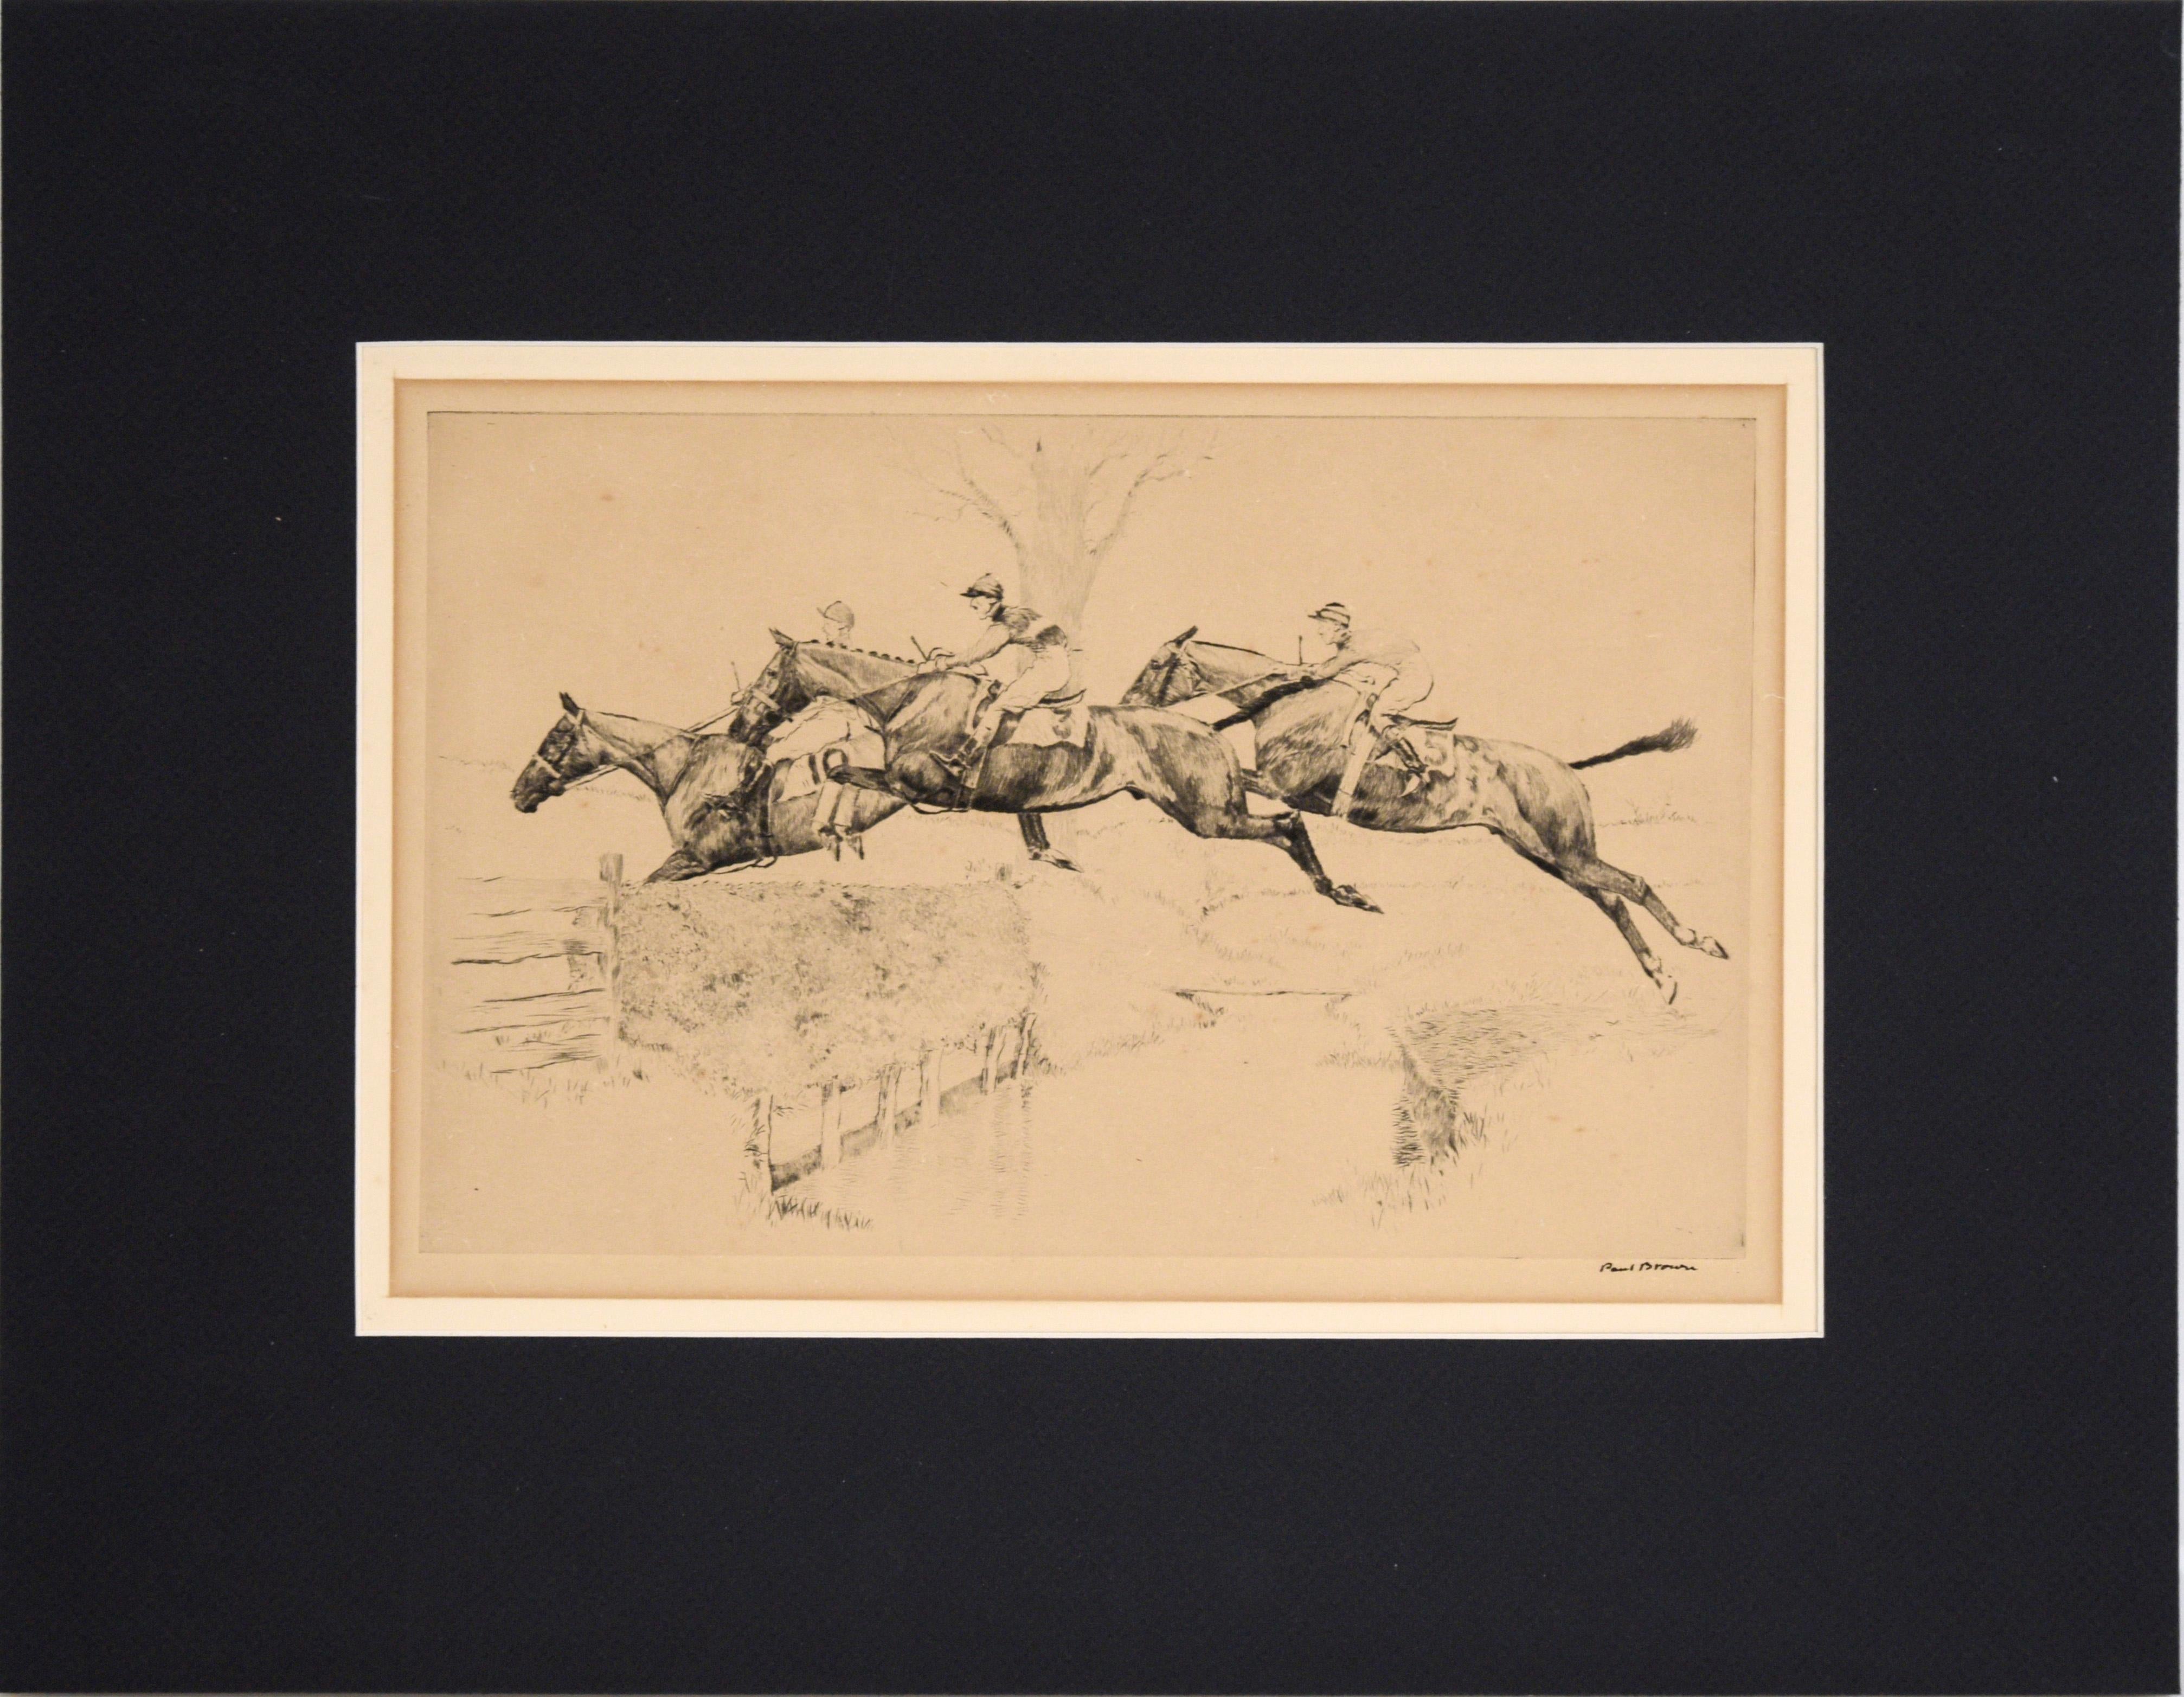 Paul Desmond Brown Figurative Print - Three Steeplechasers - Drypoint Etching on Paper